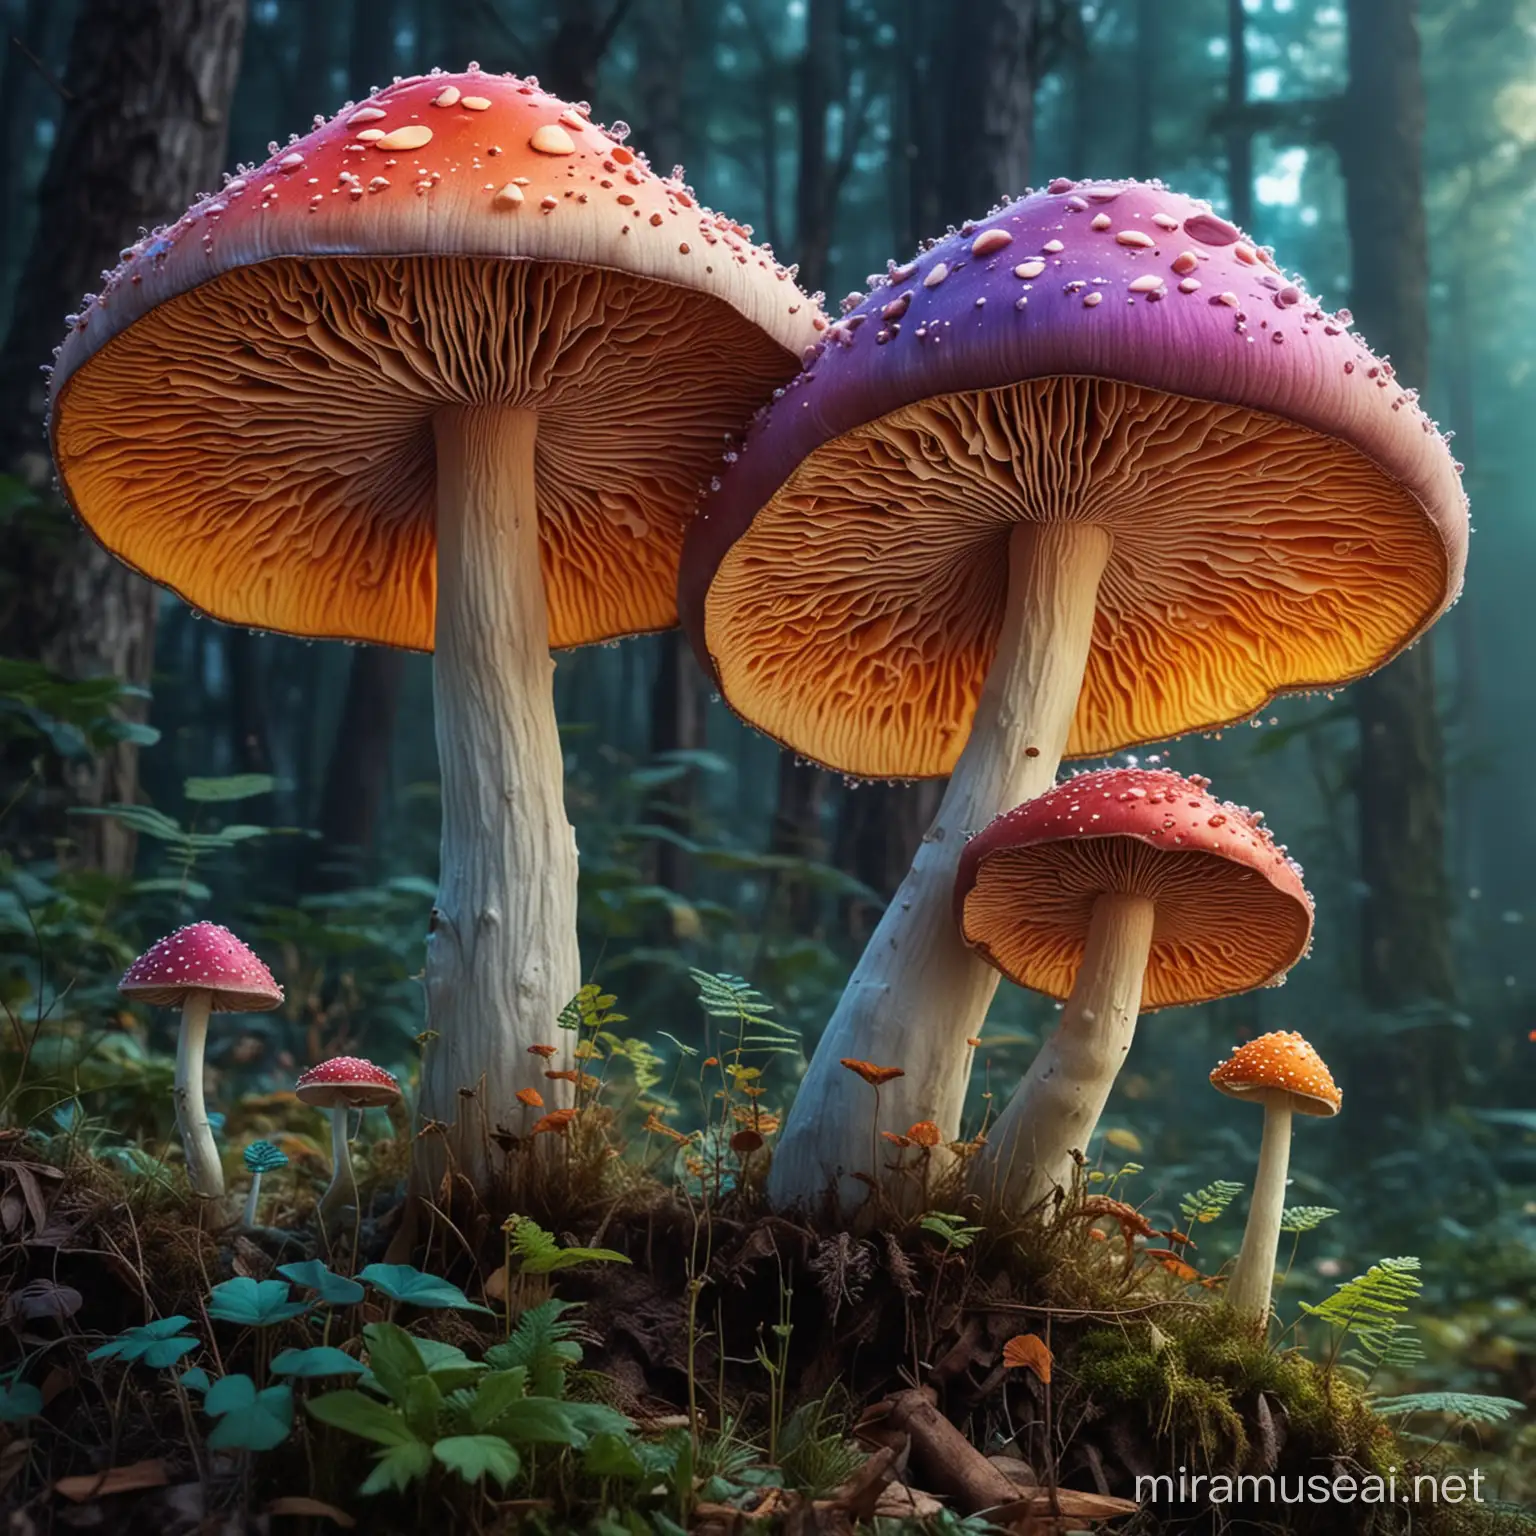 can you create an image of the colours you see when you on magic mushroom and it should be as trippy and artistic at the same time